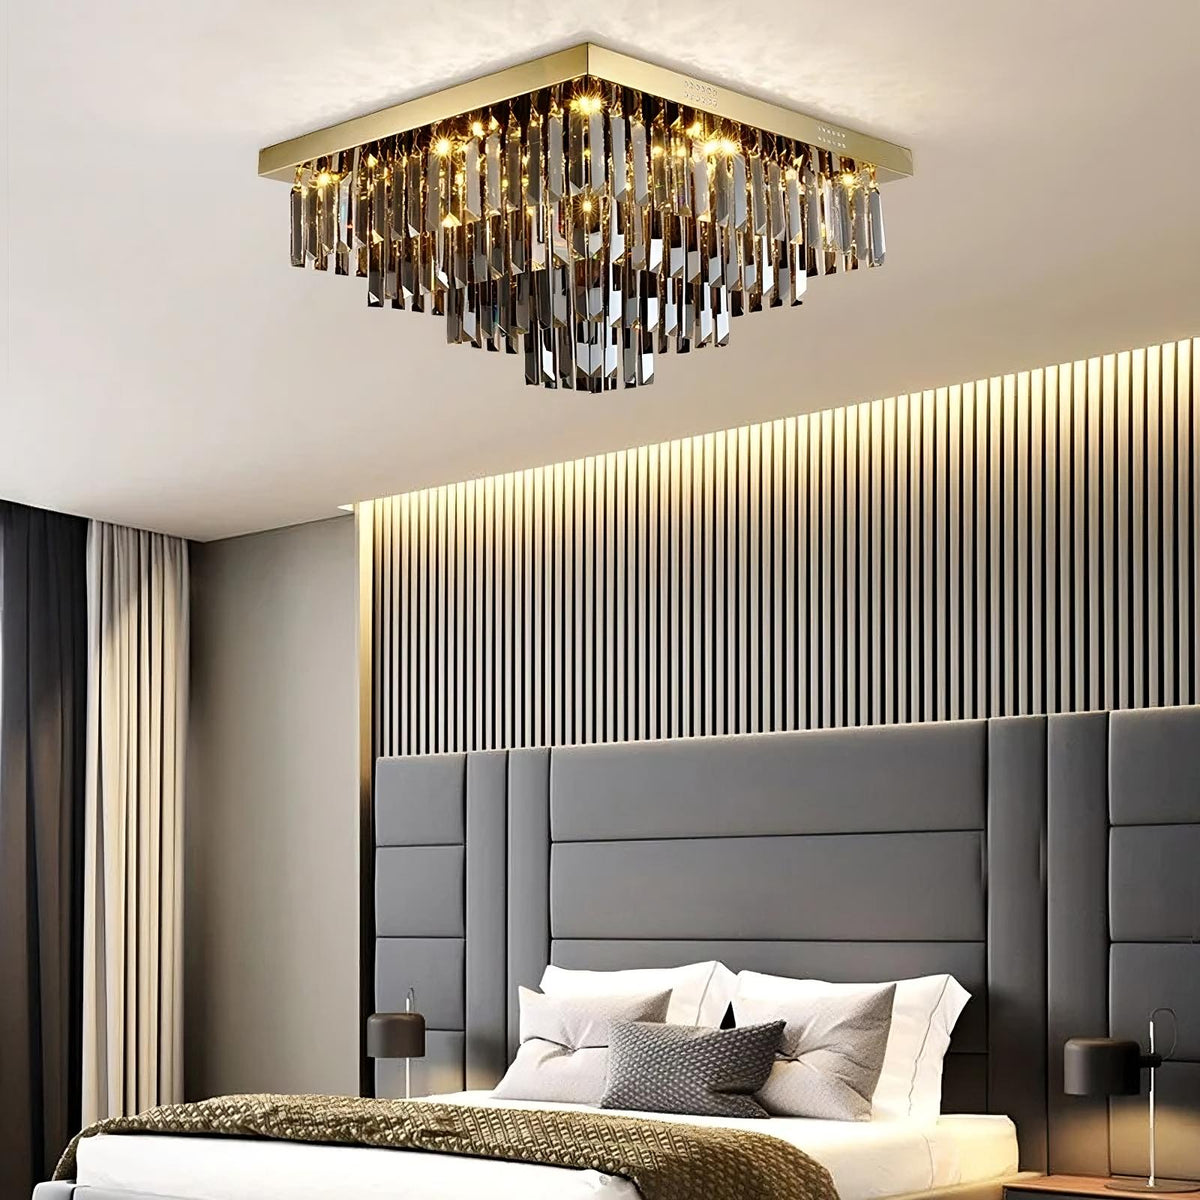 A modern bedroom features a stylish Gio Smoke Grey Crystal Ceiling Chandelier from Morsale.com, softly illuminating the space. The room has a gray padded headboard, neatly made bed with white and gray bedding, and sleek side tables with black lamps. Vertical panels adorn the wall, adding to the elegant design.